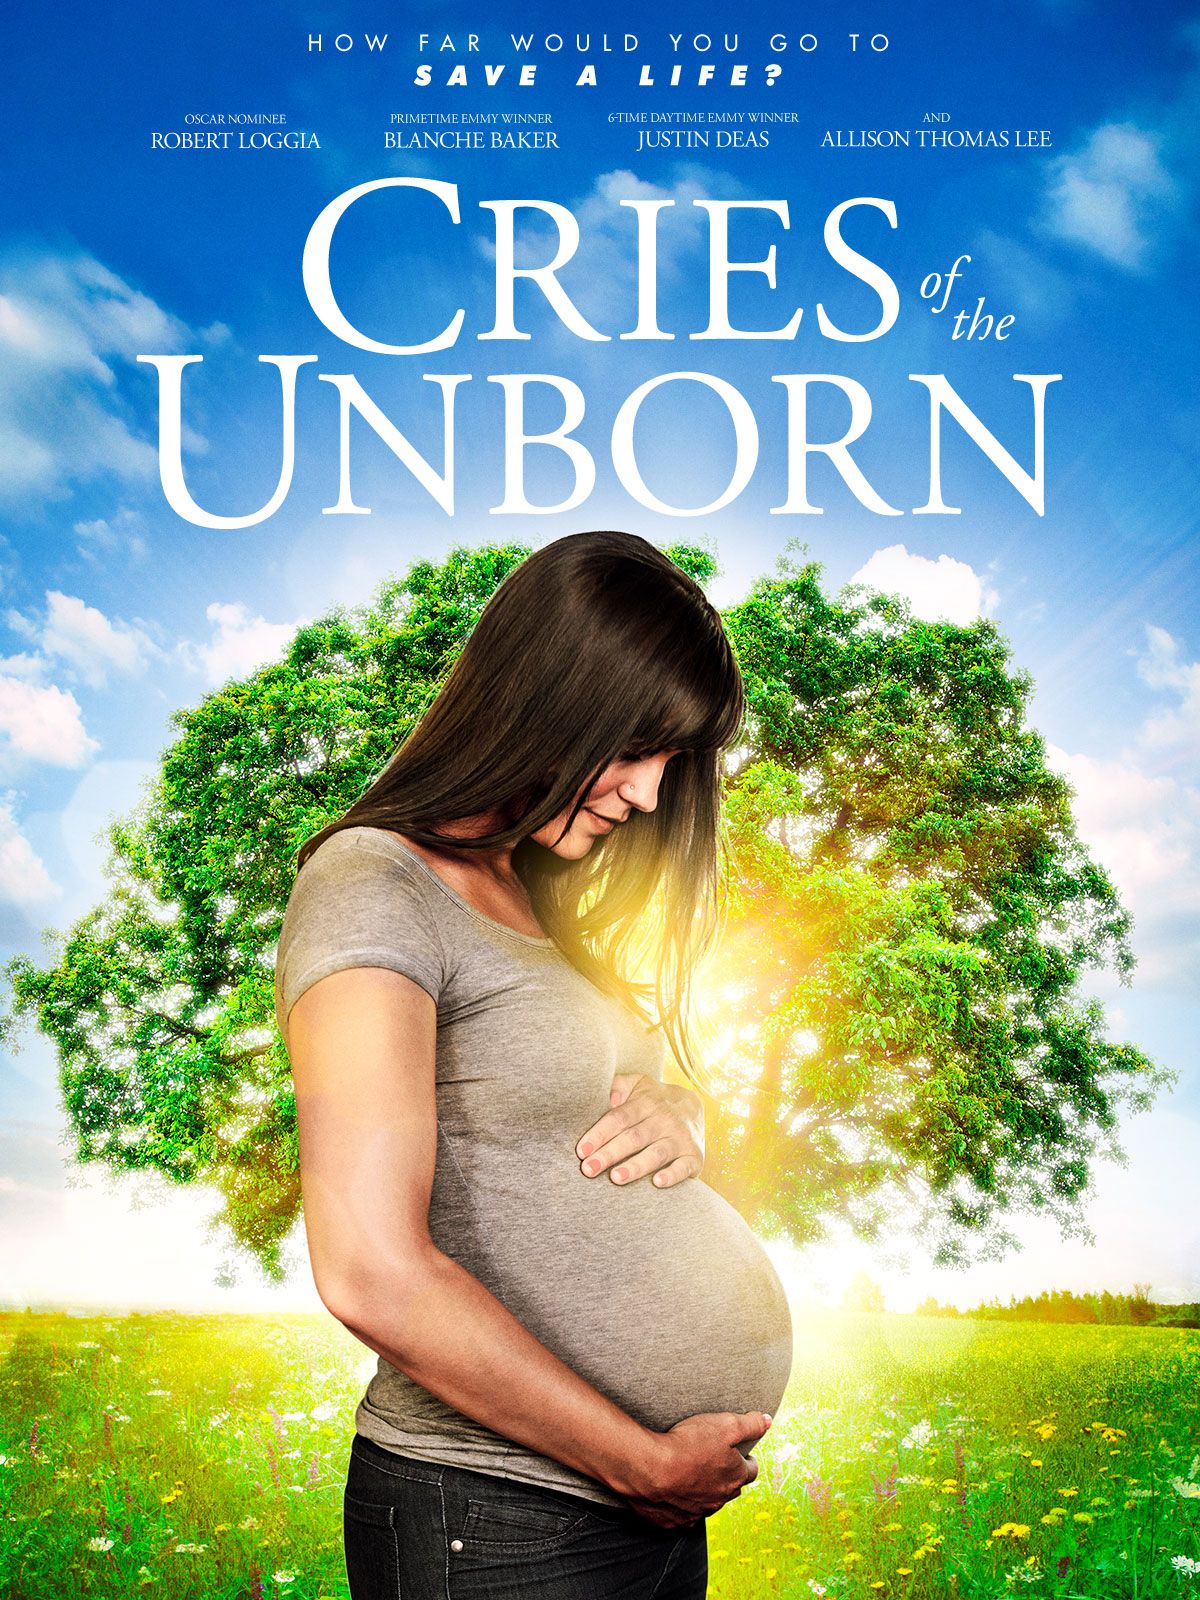 Keyart for the movie Cries of the Unborn